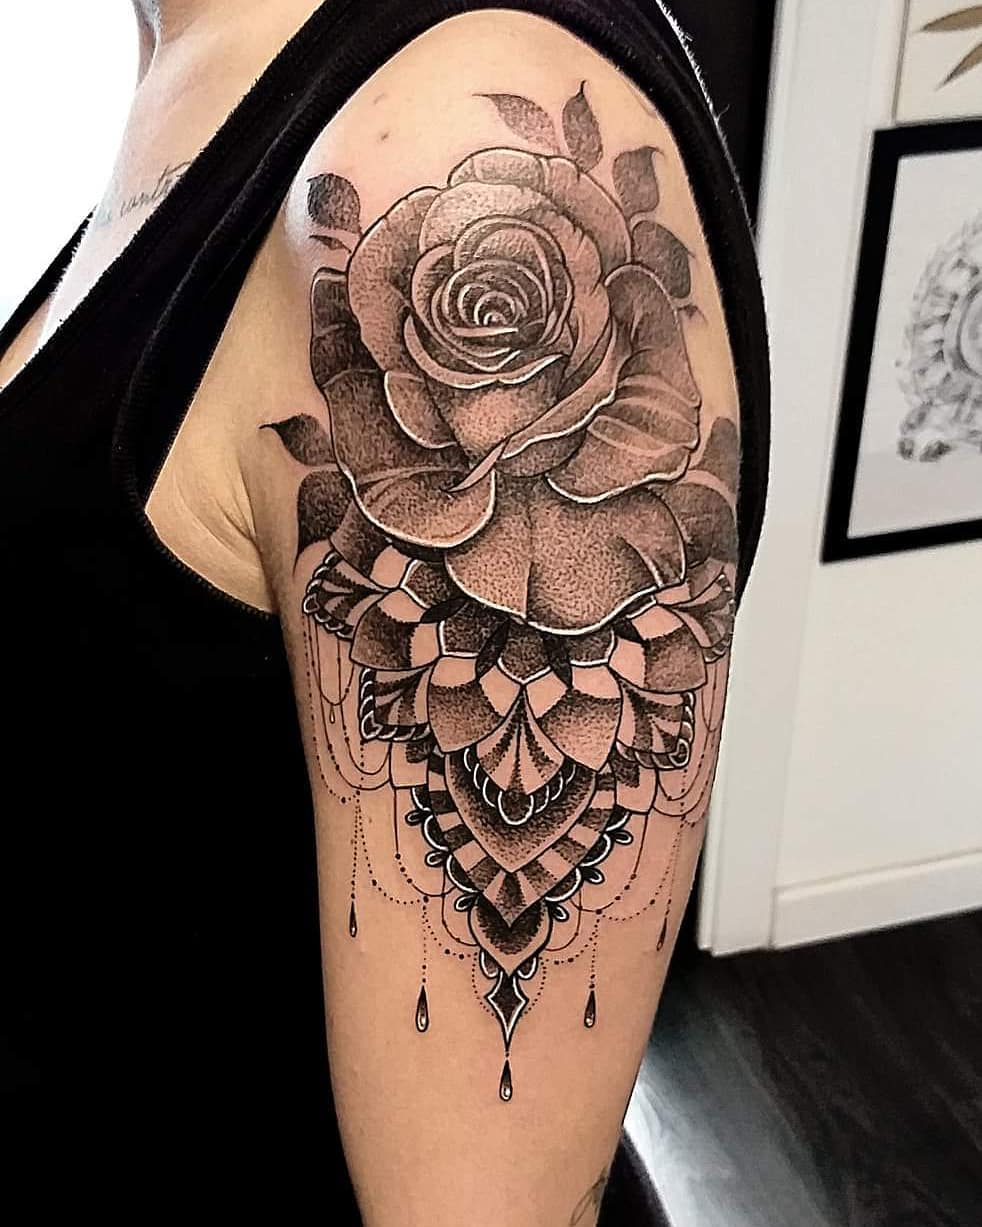 Exceptional images of dot work rose tattoo you must see